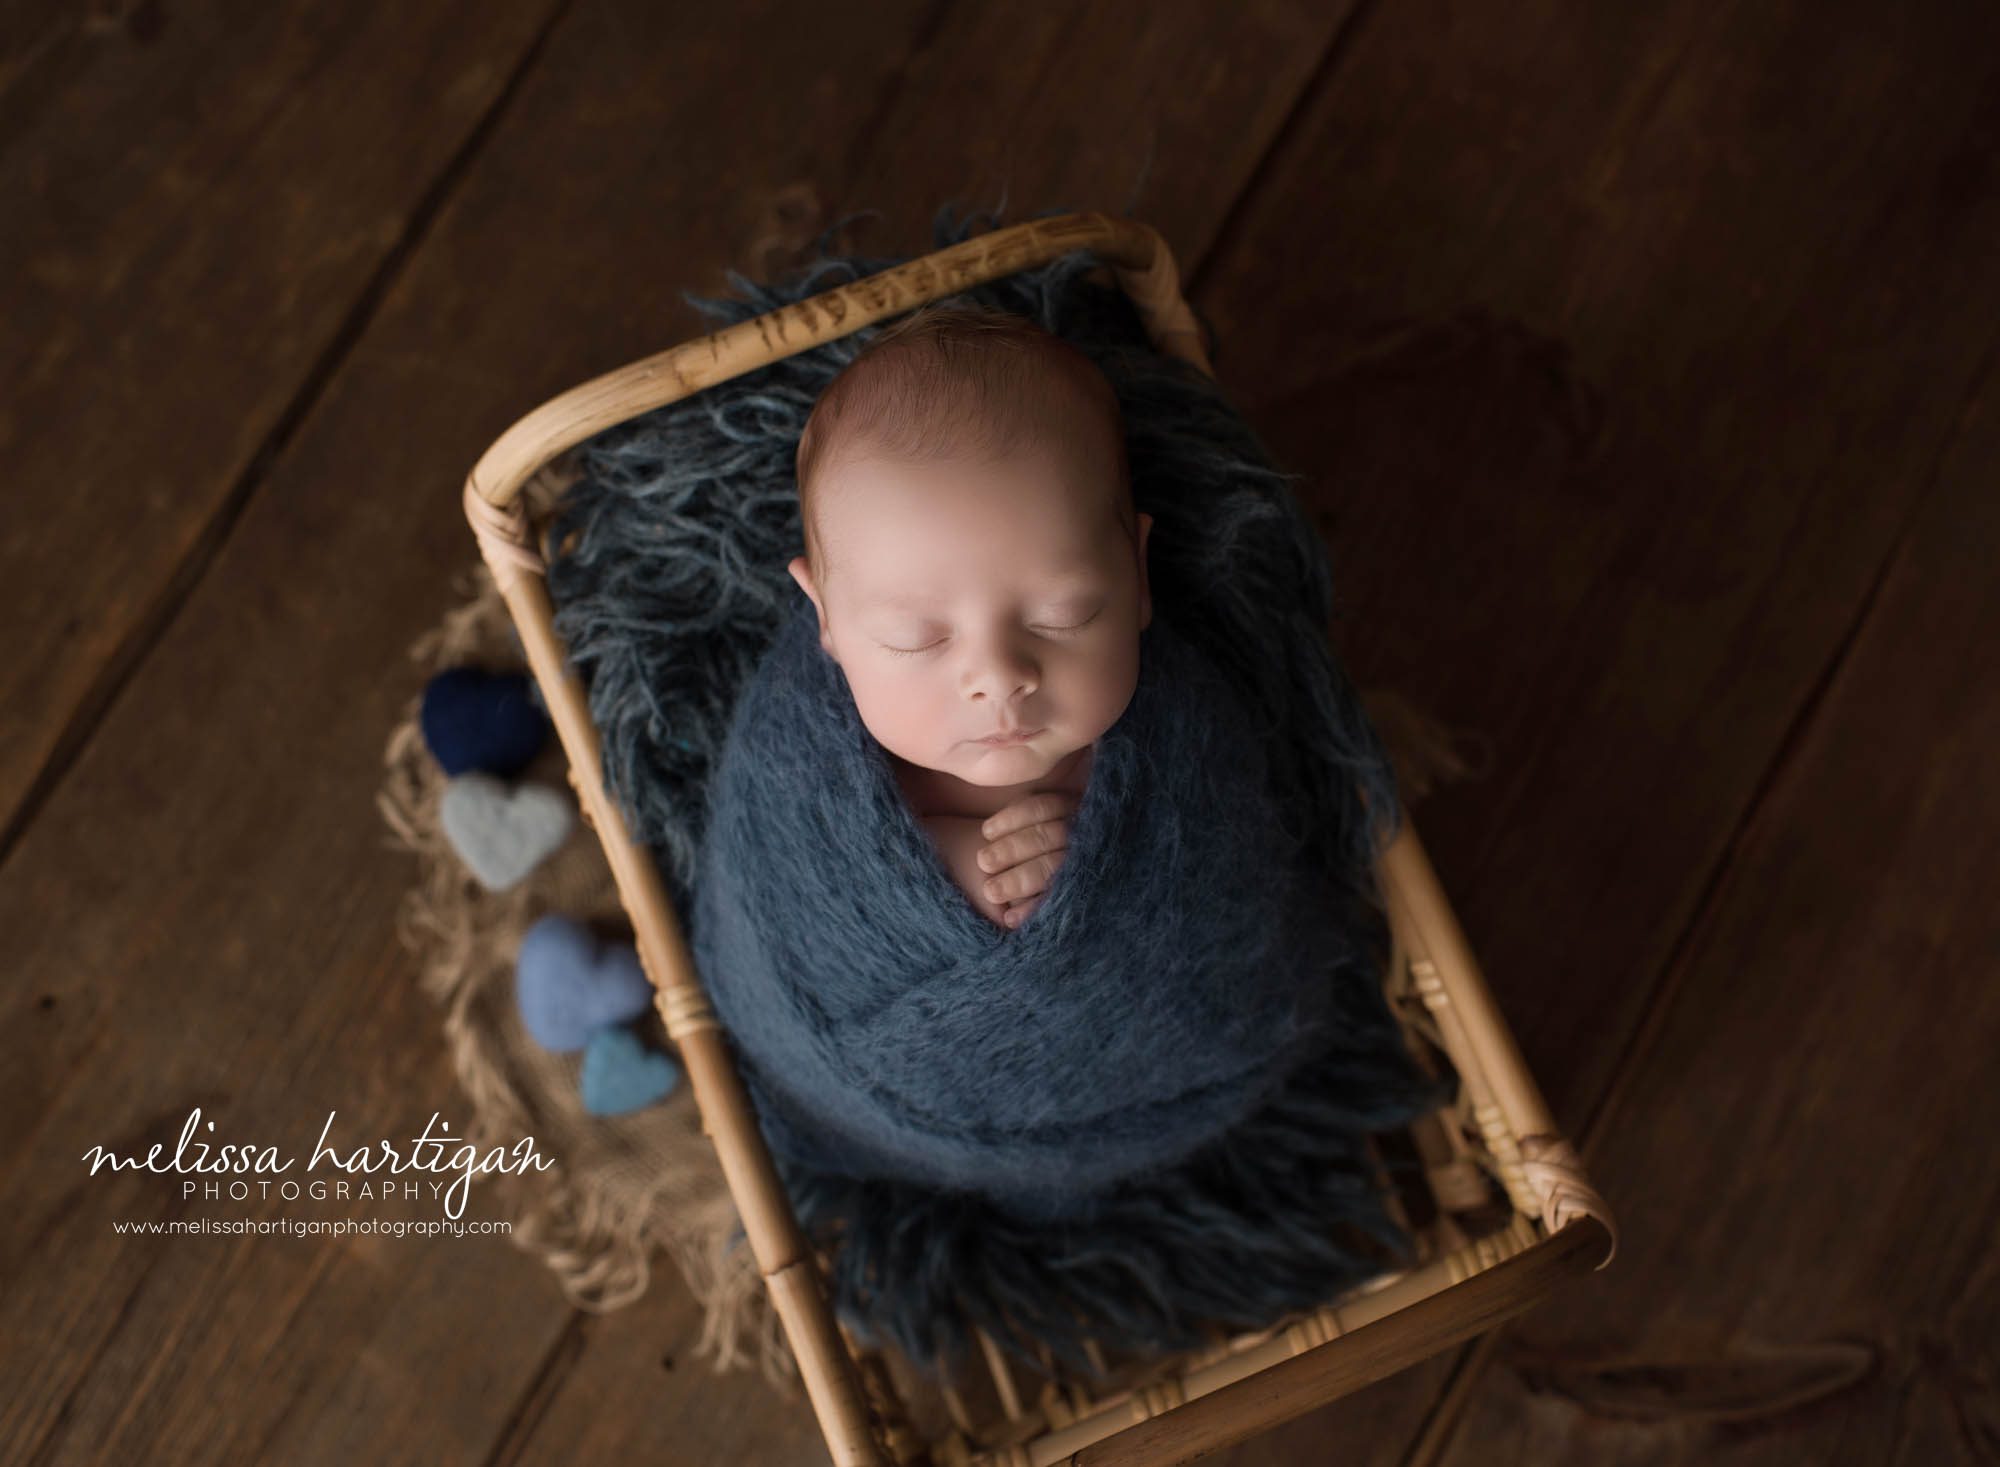 newborn baby boy posed in basket wrapped in knitted navy blue wrap with blue felted hearts